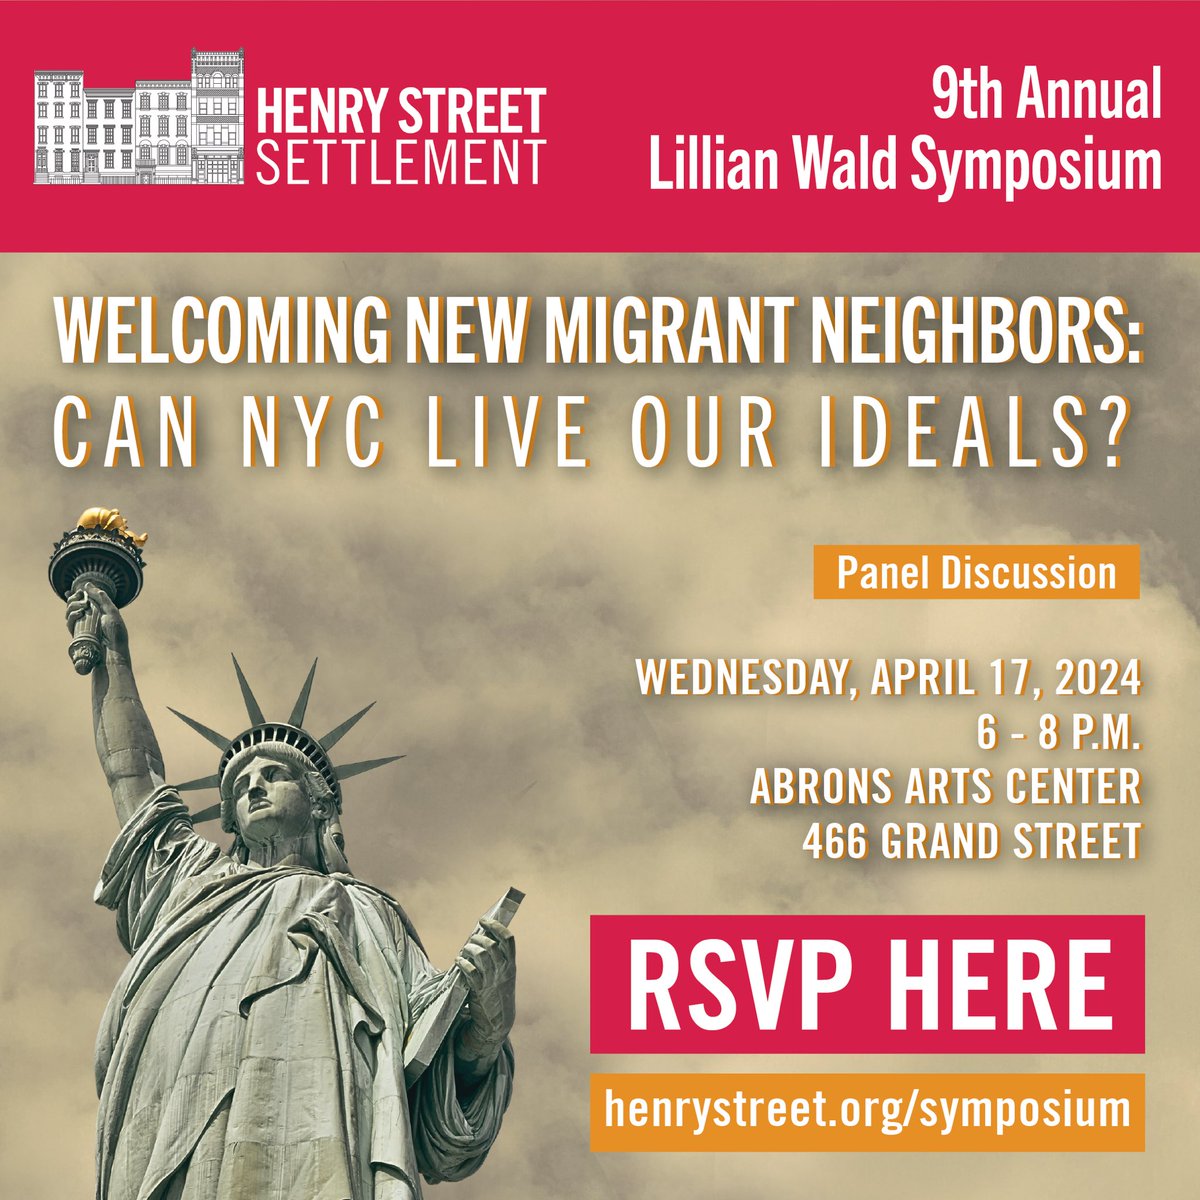 You’re invited to the 9th Annual Lillian Wald Symposium titled “Welcoming New Migrant Neighbors: Can NYC Live Our Ideals?” Join us at Abrons Arts Center on April 17 at 6 p.m. This event is free and open to the public, but you must RSVP. Register now at HenryStreet.org/Symposium